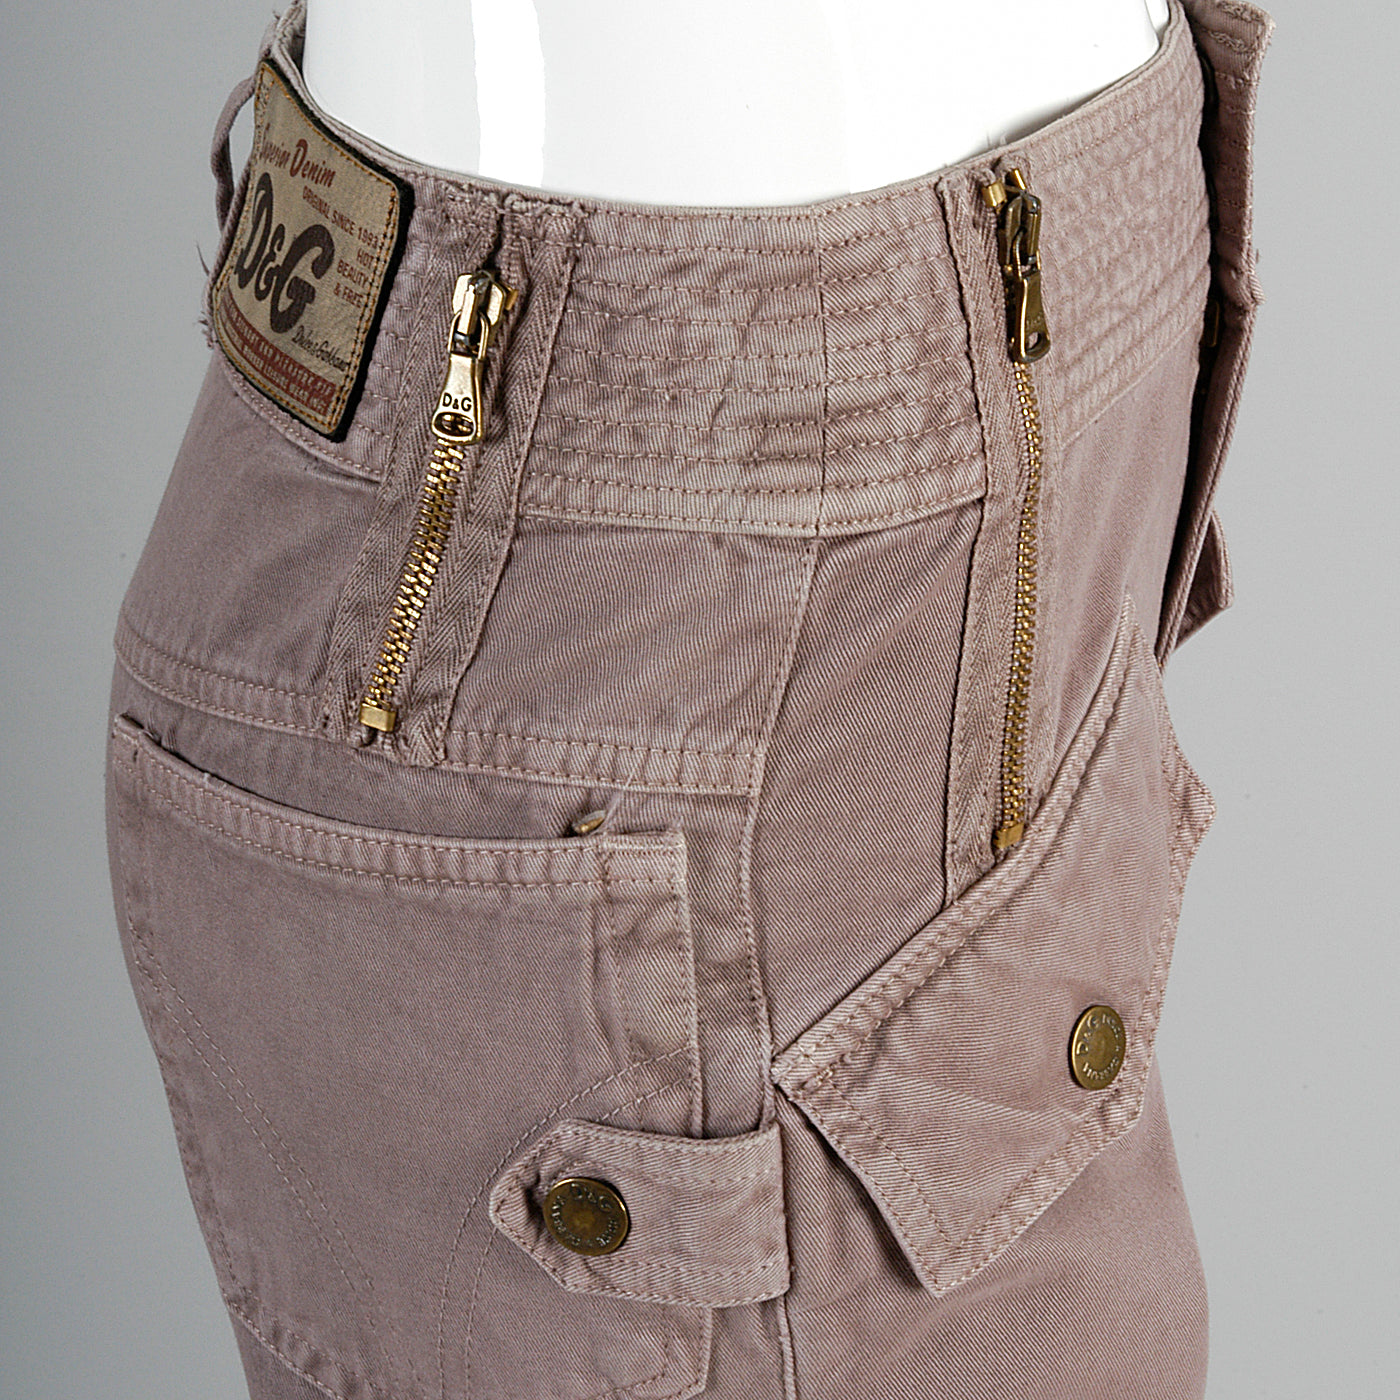 D&G Superior Denim by Dolce & Gabbana Taupe Twill Pants with Zippers Snaps and Smocked Thighs